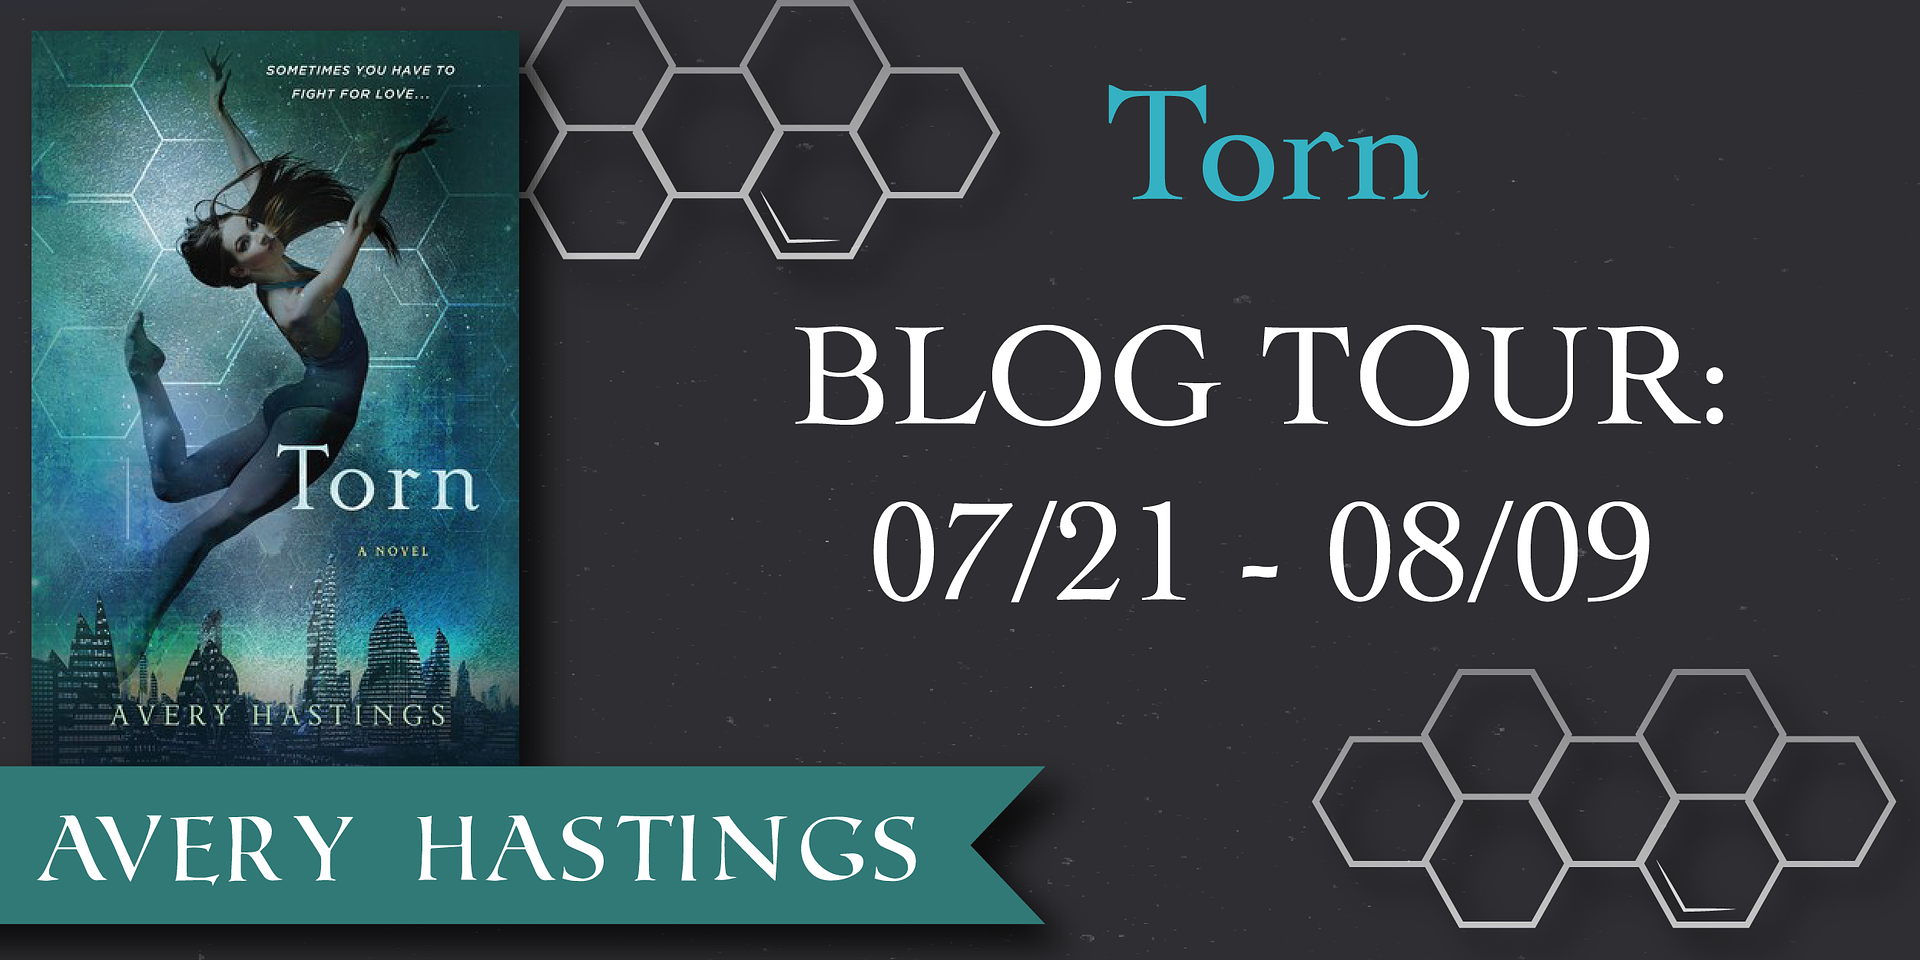 Tour for  Torn by Avery Hastings